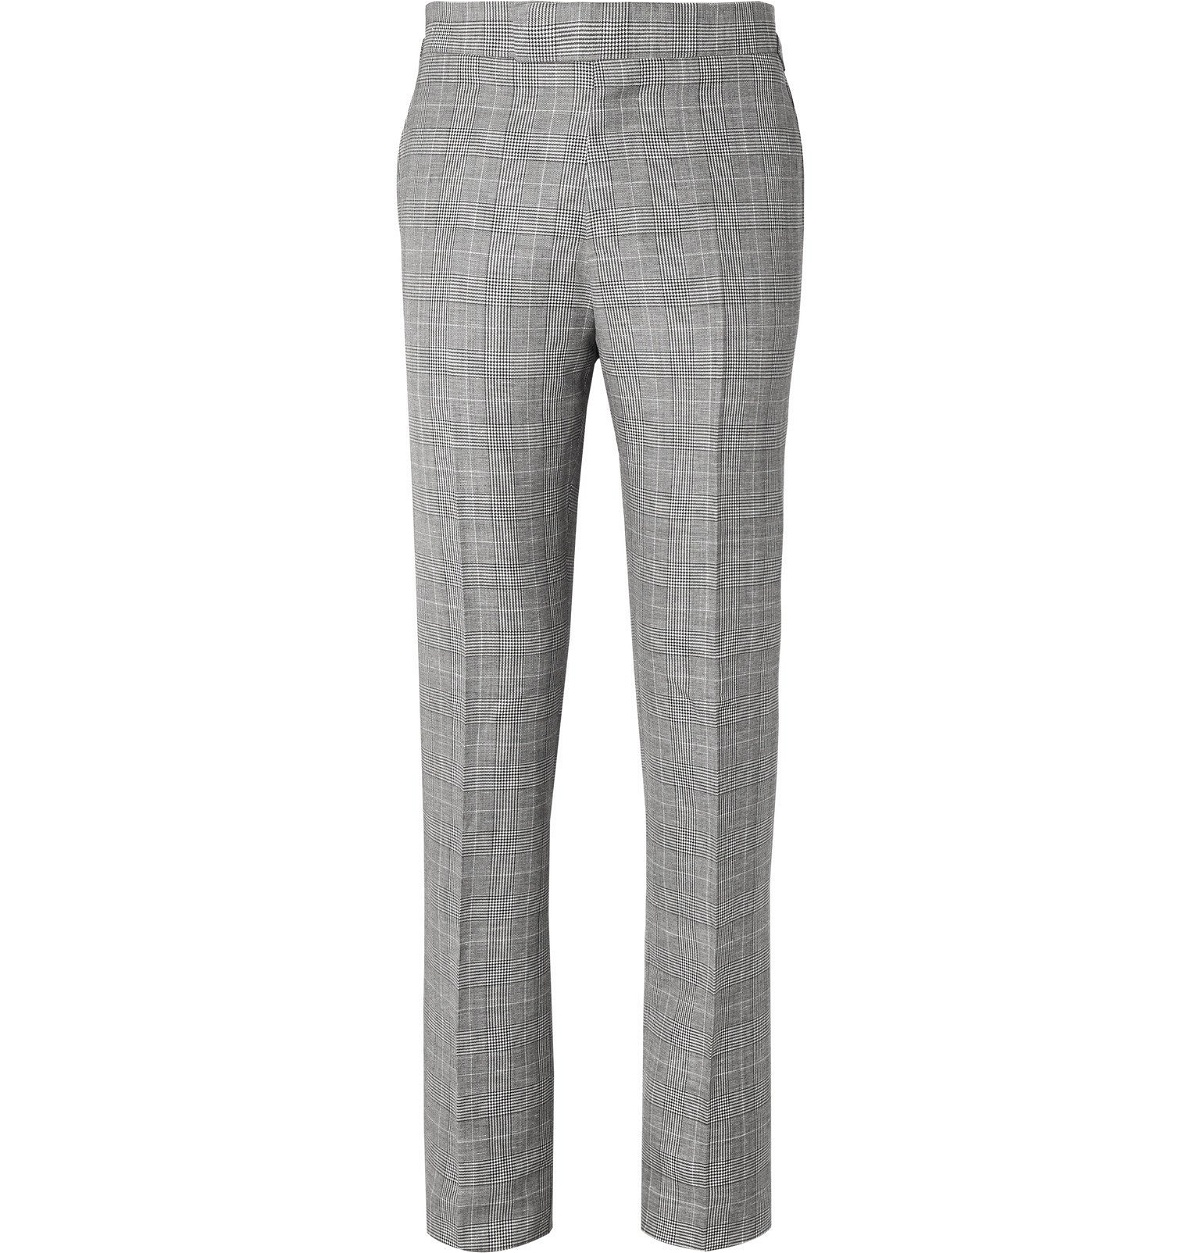 Kingsman - Eggsy's Grey Prince of Wales Checked Wool and Linen-Blend ...